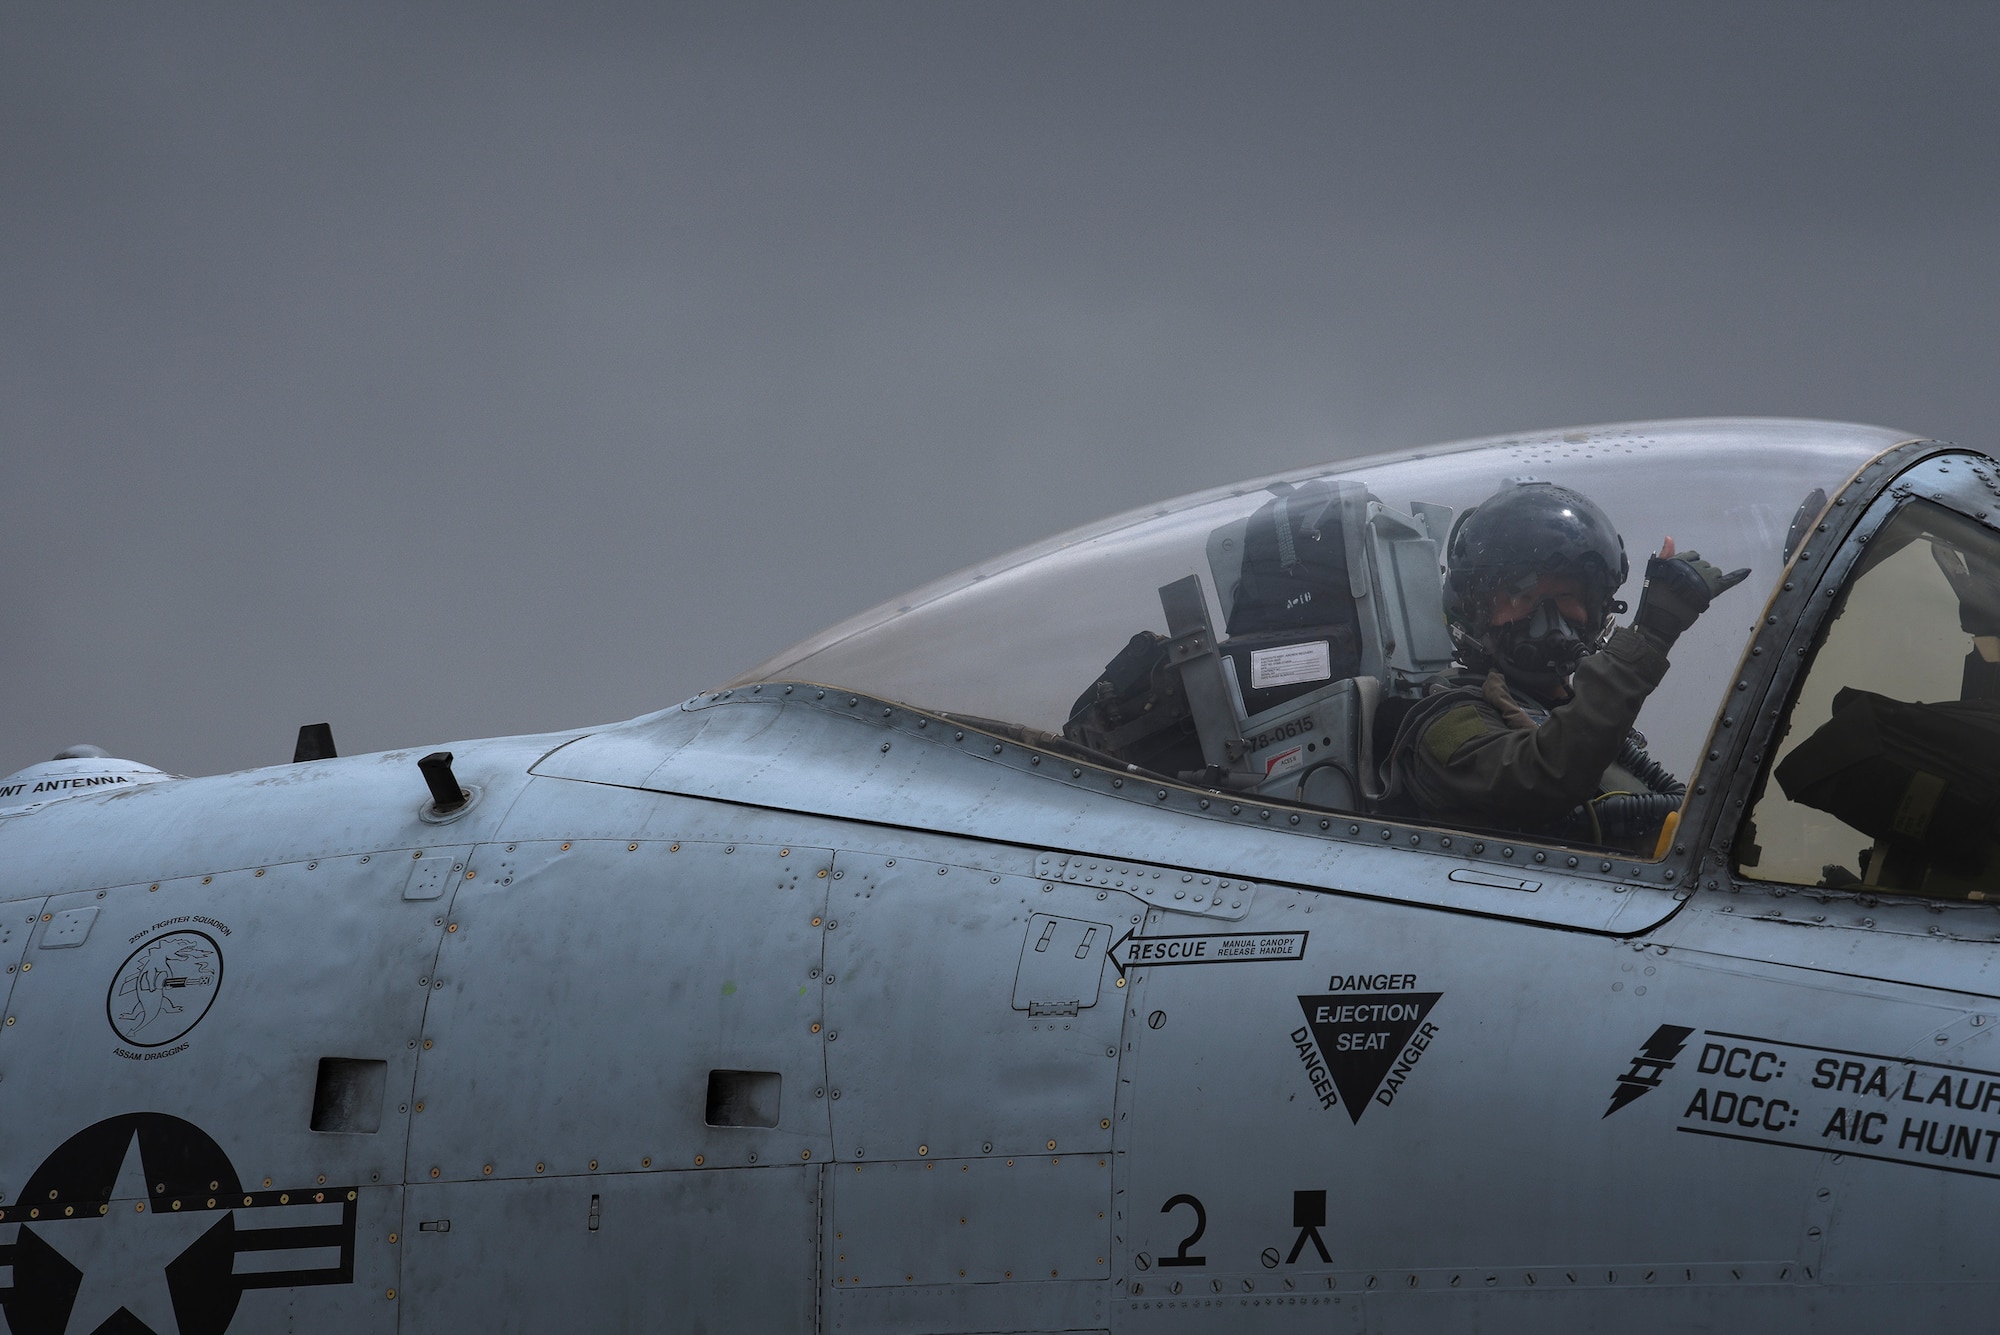 A 25th Fighter Squadron A-10C Thunderbolt II pilot taxis the runway prior to takeoff April 22, 2020, at Osan Air Base, Republic of Korea. Amid the COVID-19 global pandemic, the 25th FS follows the United States Forces-Korea’s health protection control measures to preserve their mission capabilities while maintaining a high state of readiness to protect the ROK. (U.S. Air Force photo by Staff Sgt. Greg Nash)